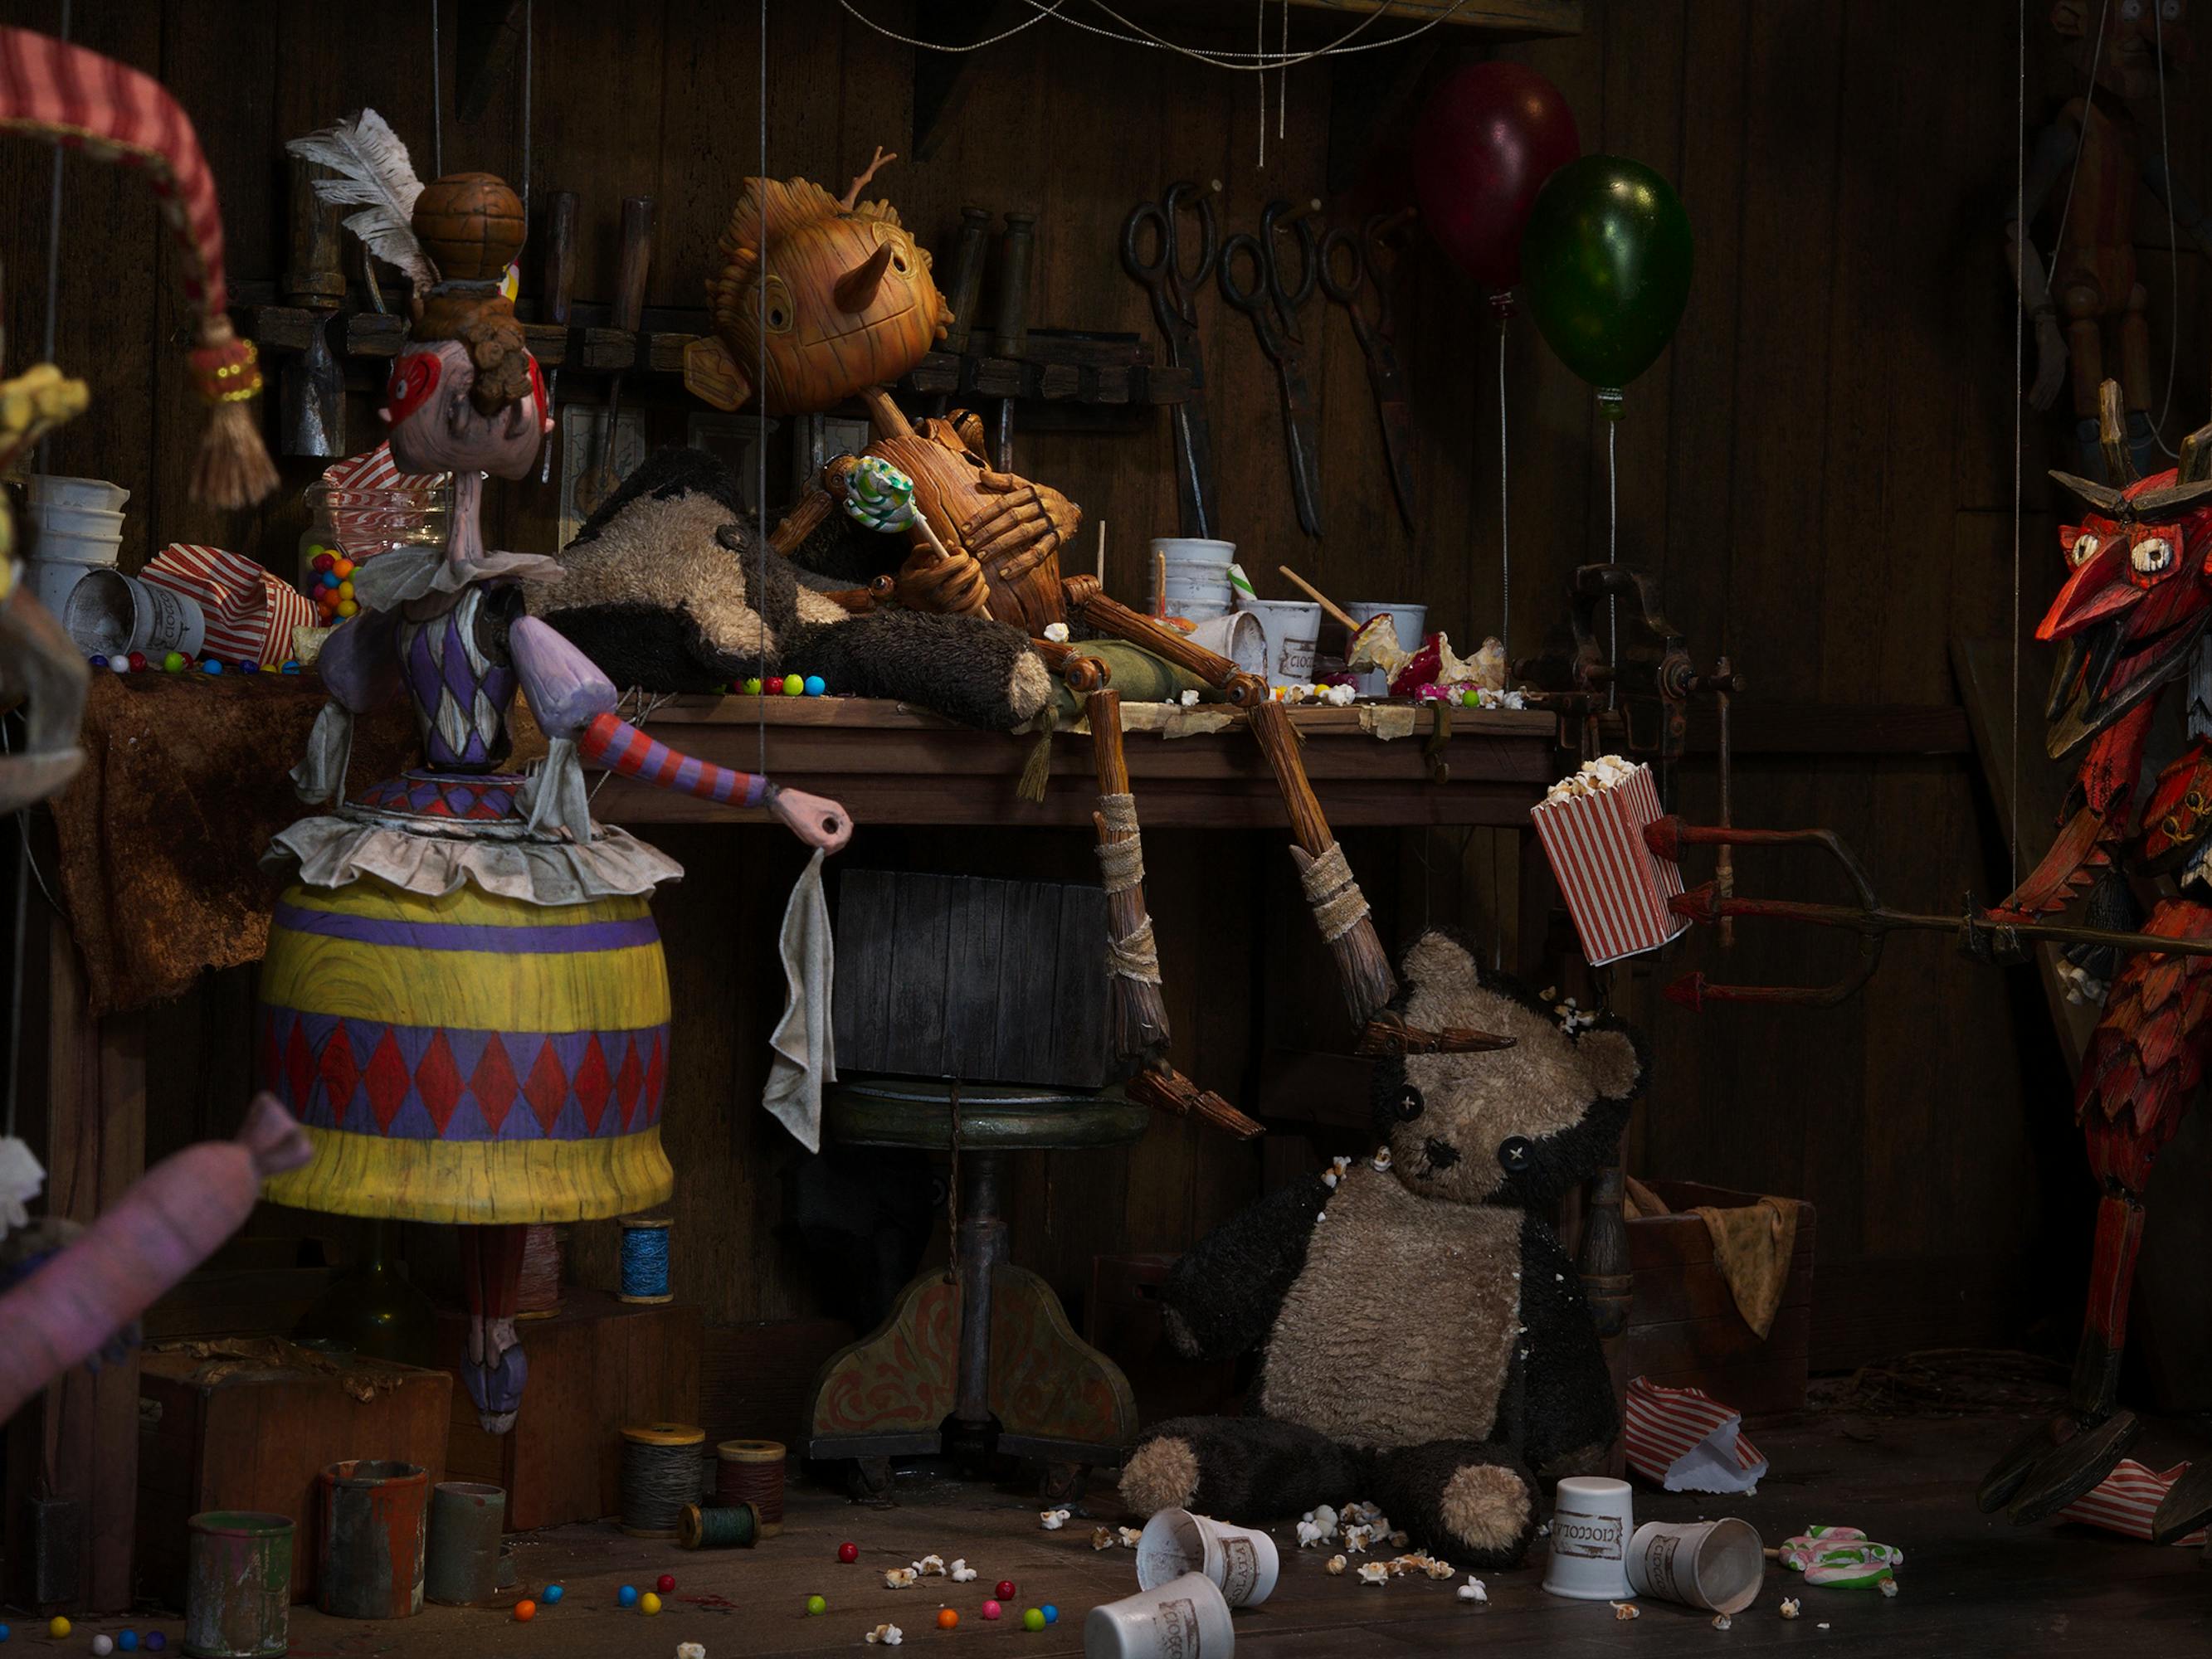 Pinocchio (Gregory Mann) rests on a worktable after eating some sweet treats and snacks.